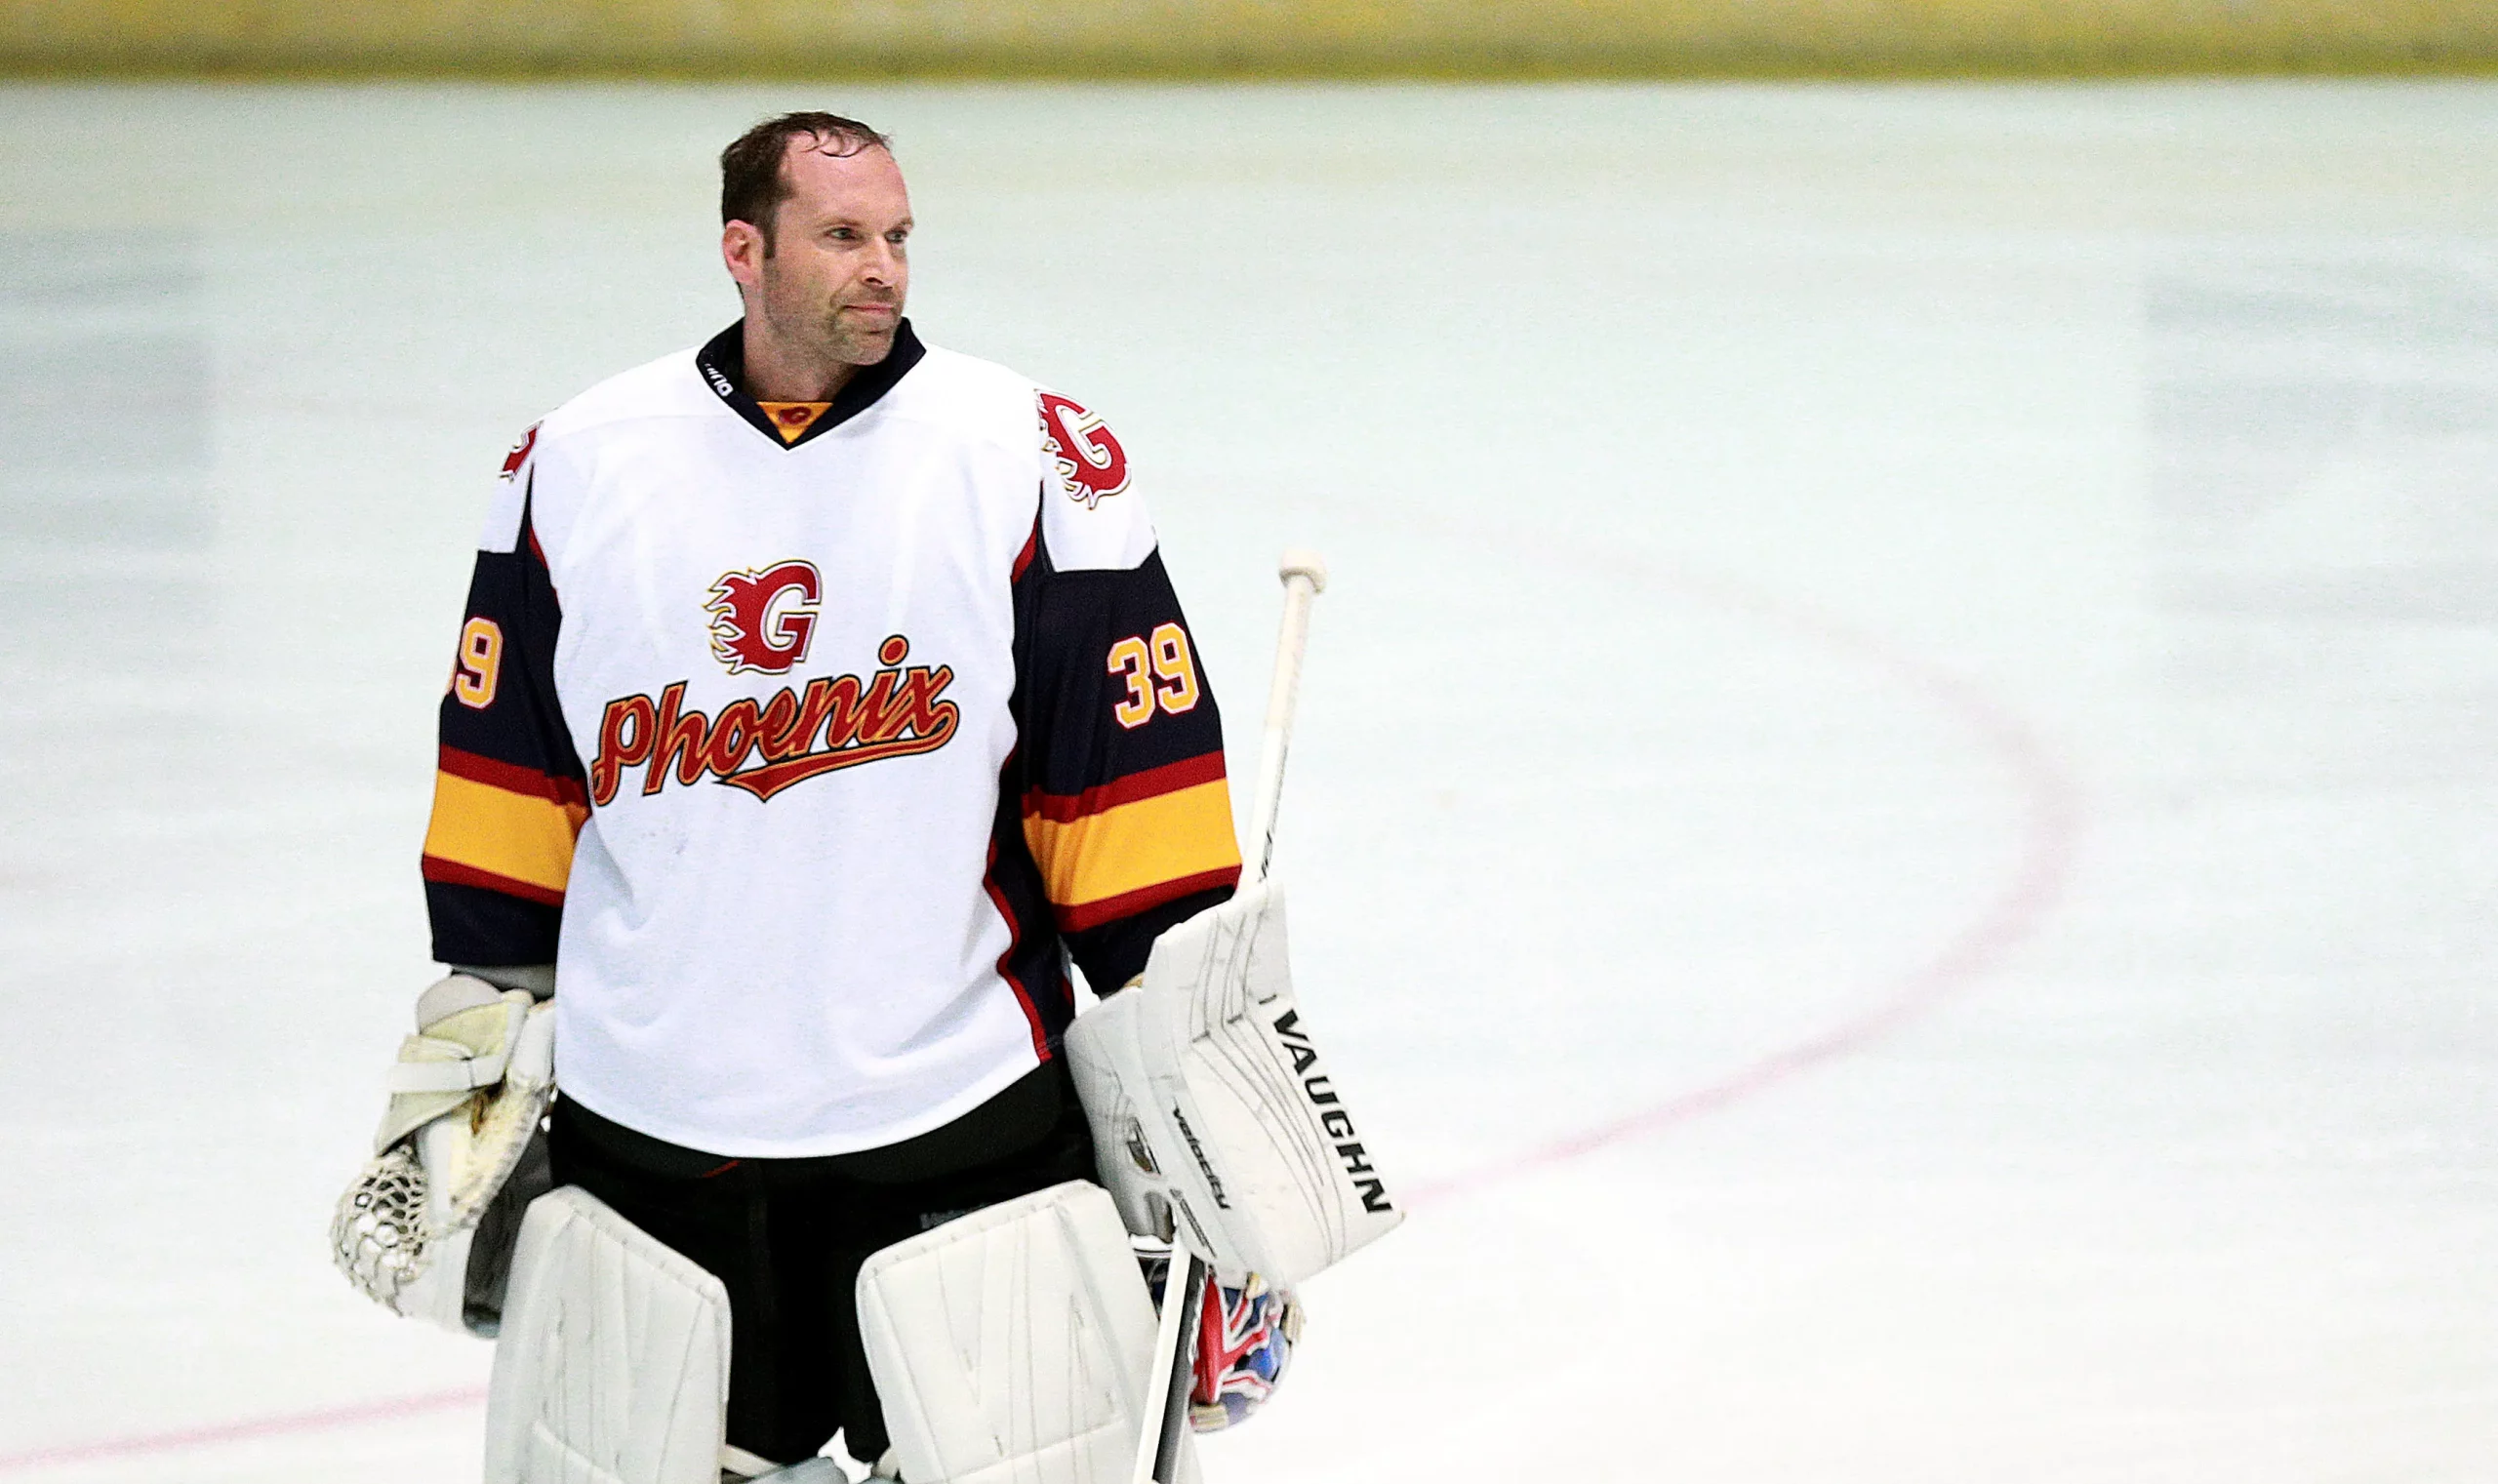 Petr Čech, now of the Chelmsford Chieftains, spent two seasons with the Guildford Phoenix (Image: Guildford Phoenix)